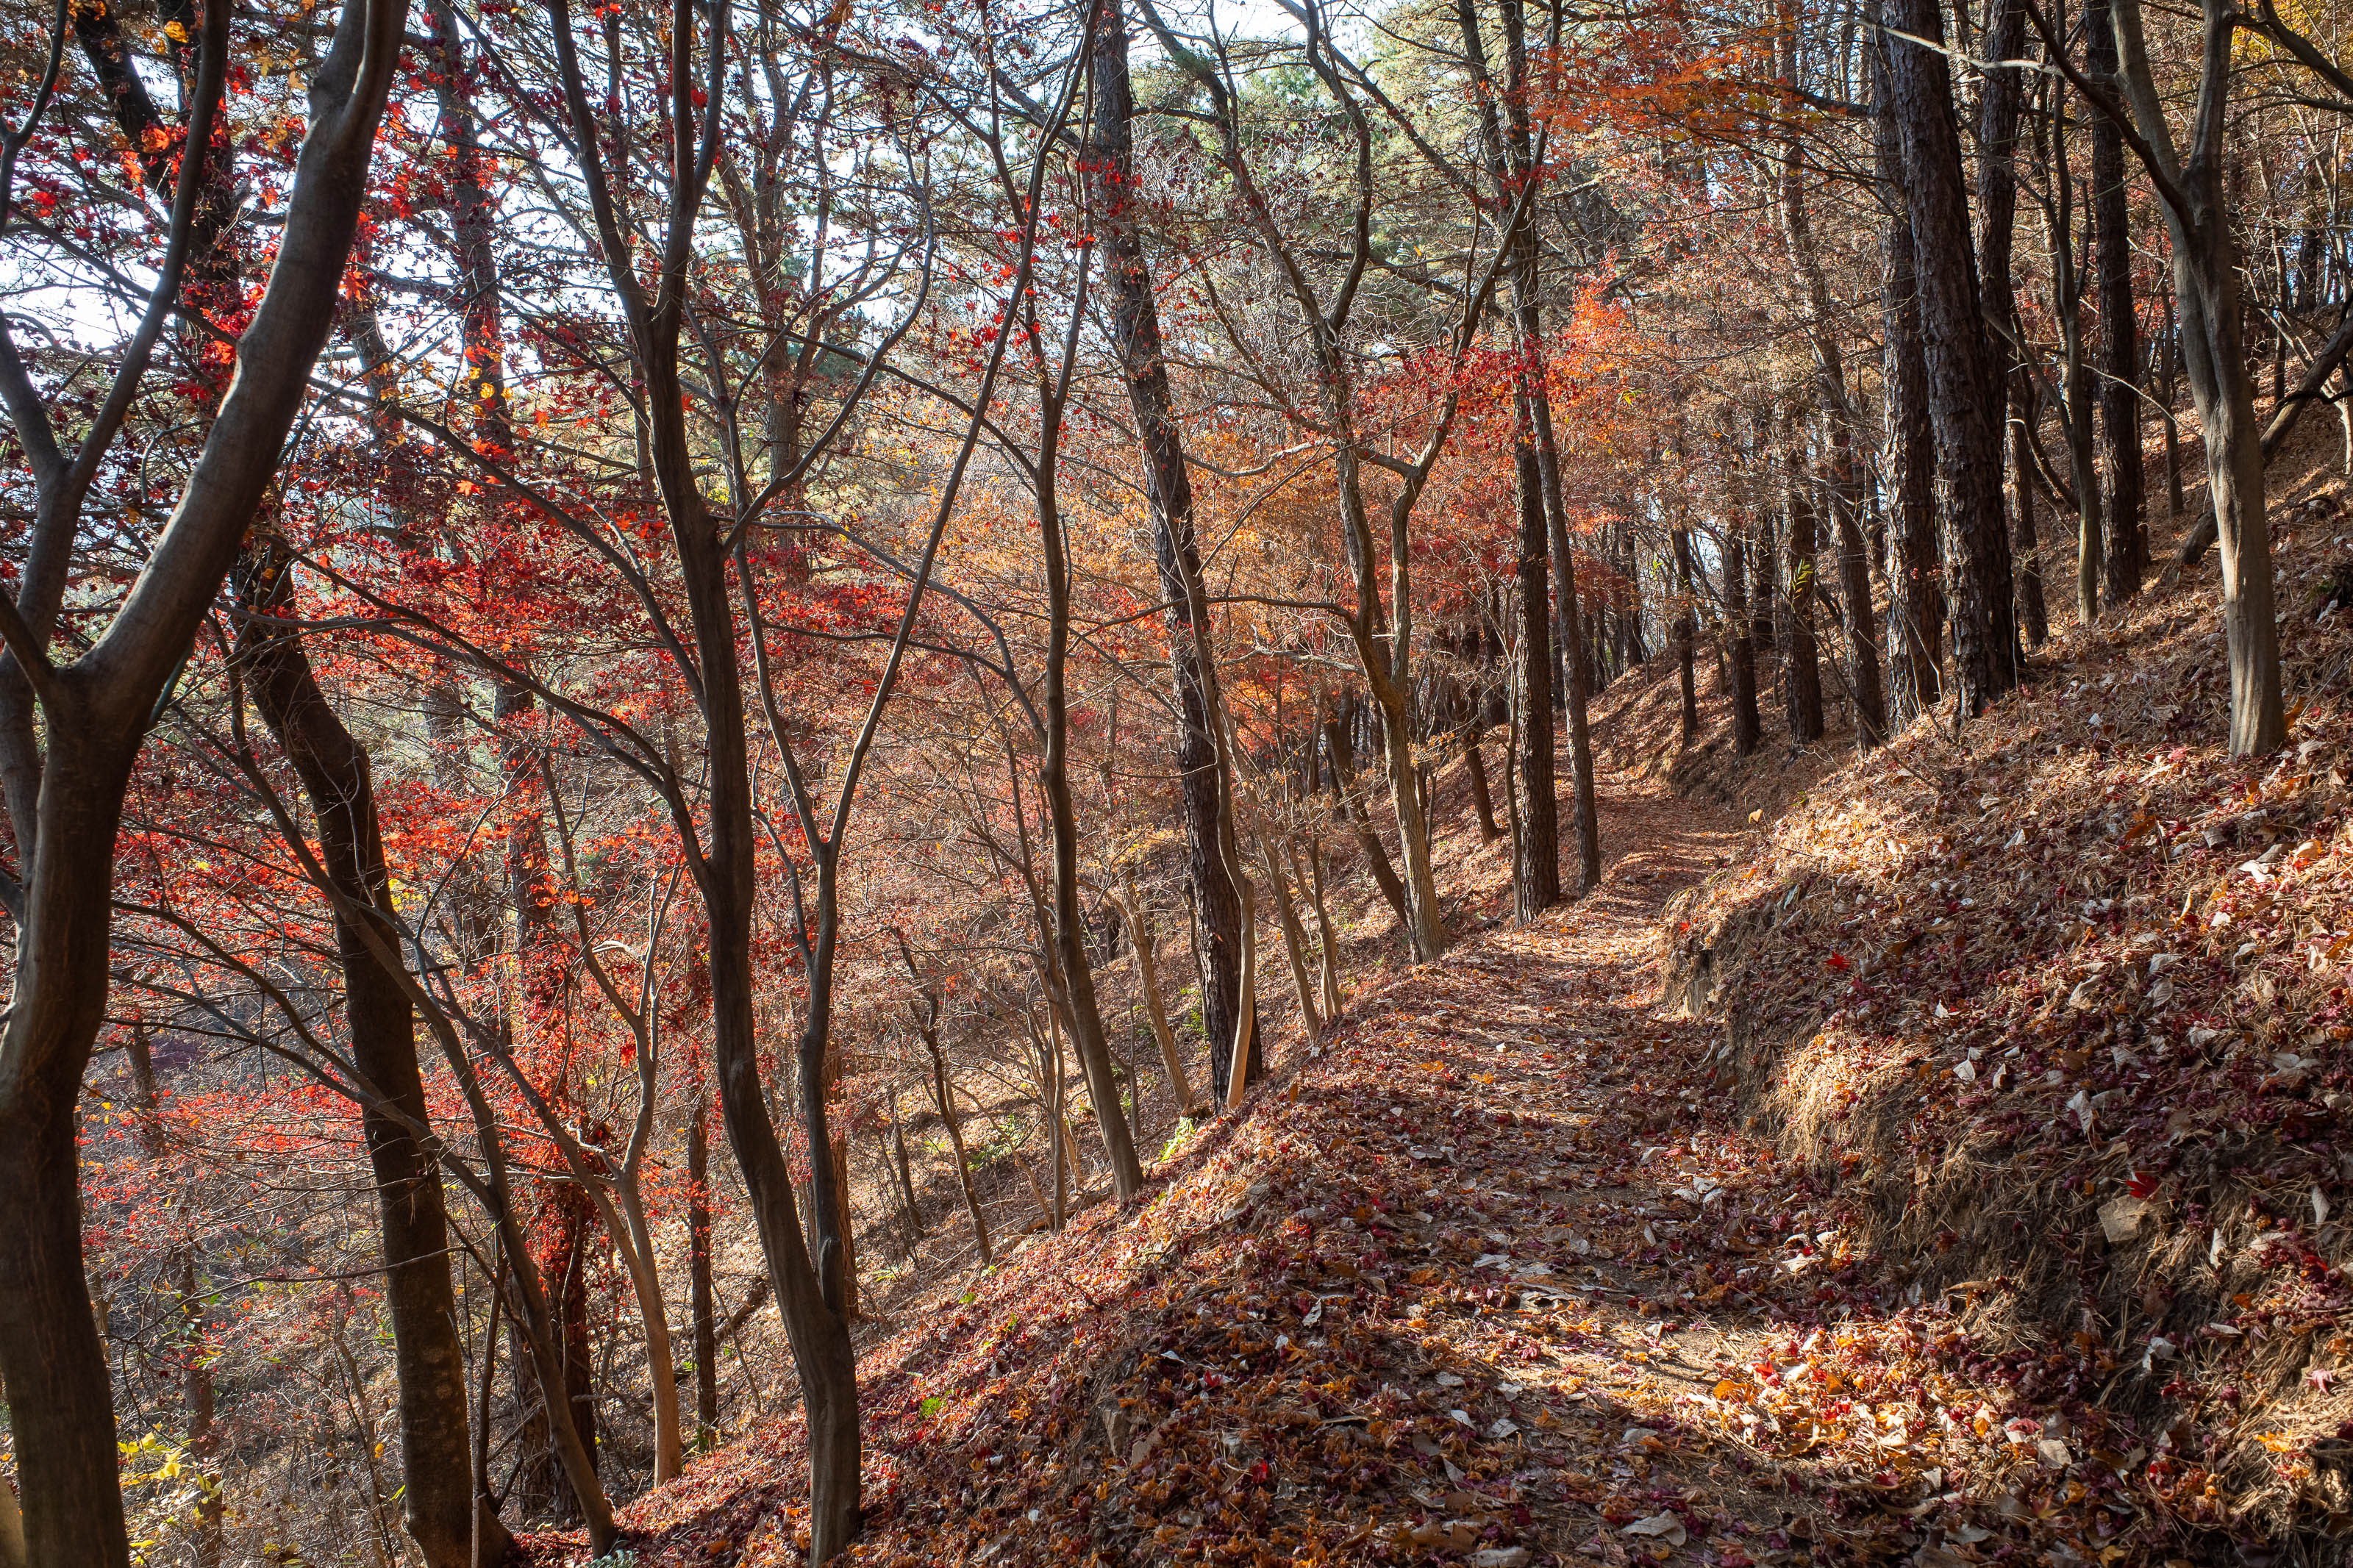 Korean-Hiking-Daejeon-Bomunsan - The actual trail was not too colourful today, mostly just brown and pine. Here is a rare glimpse of colour.